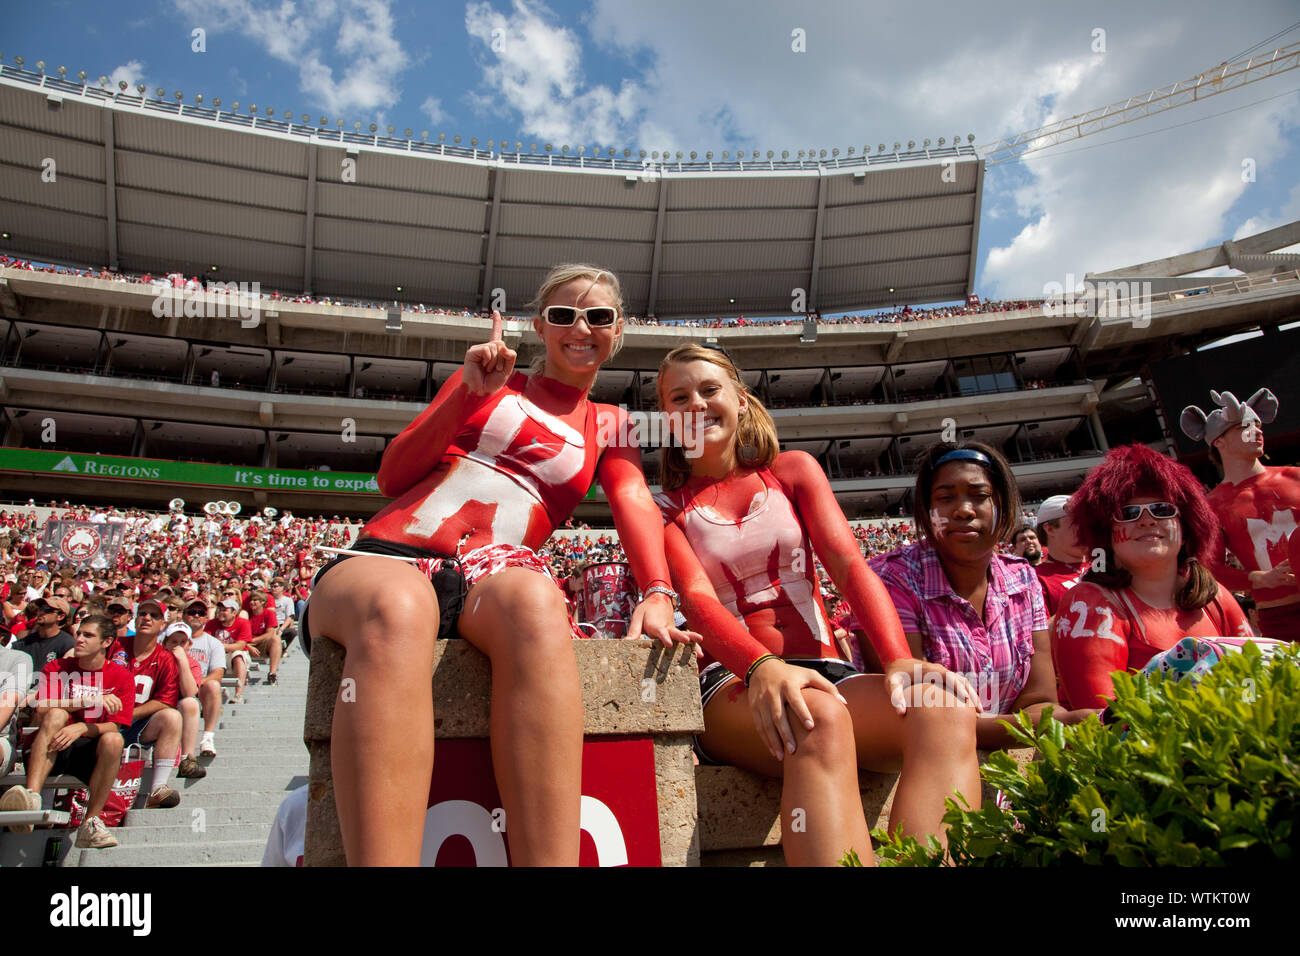 Most of the fans wear crimson and white with the name of the football team on their garments at University of Alabama, Tuscaloosa, Alabama Stock Photo